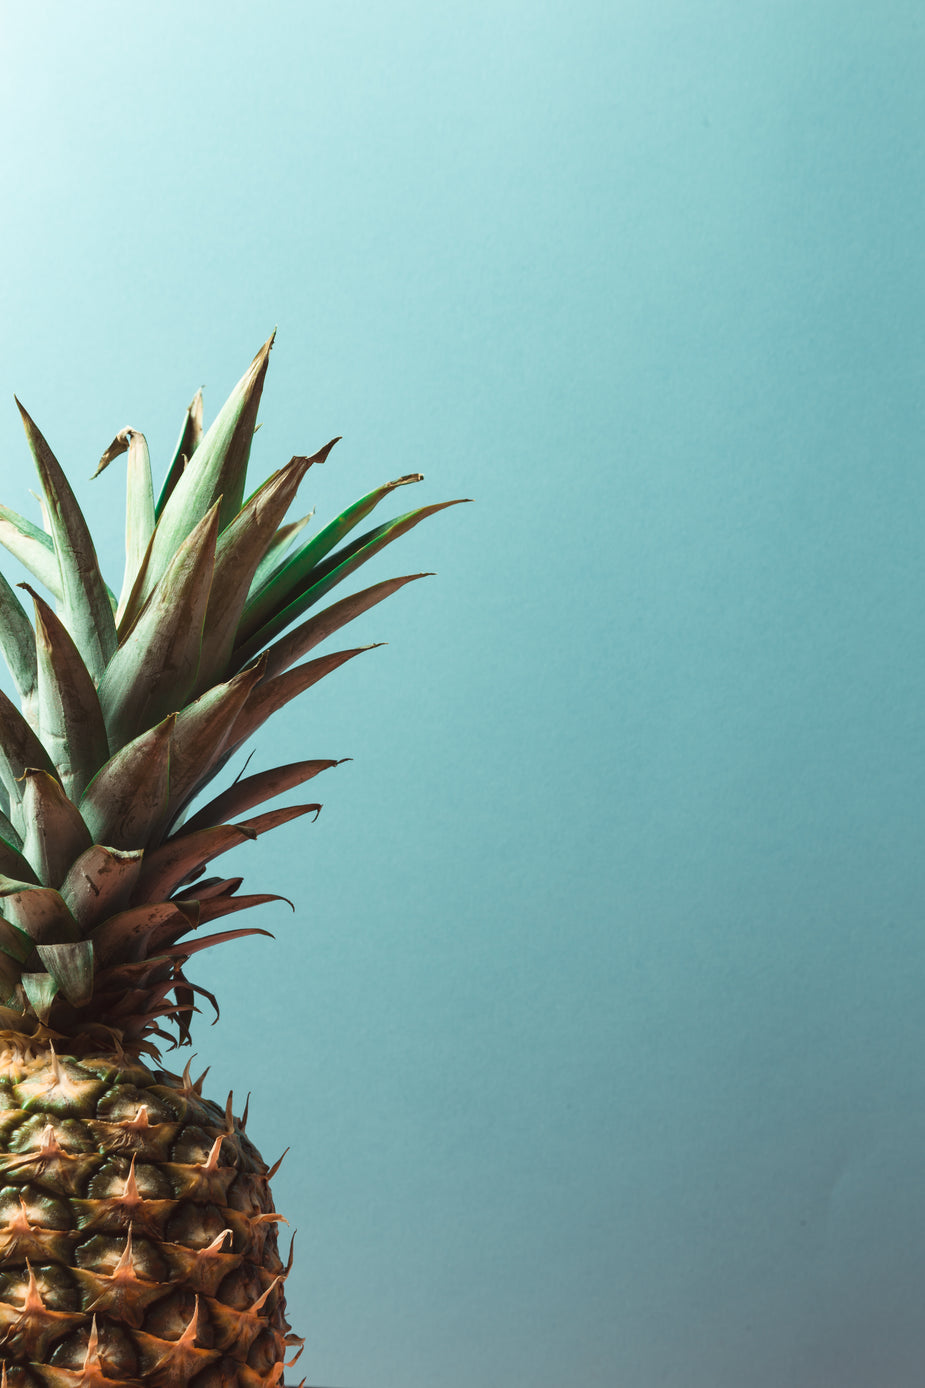 https://burst.shopifycdn.com/photos/ripe-pineapple-sits-against-a-blue-background.jpg?width=925&format=pjpg&exif=0&iptc=0